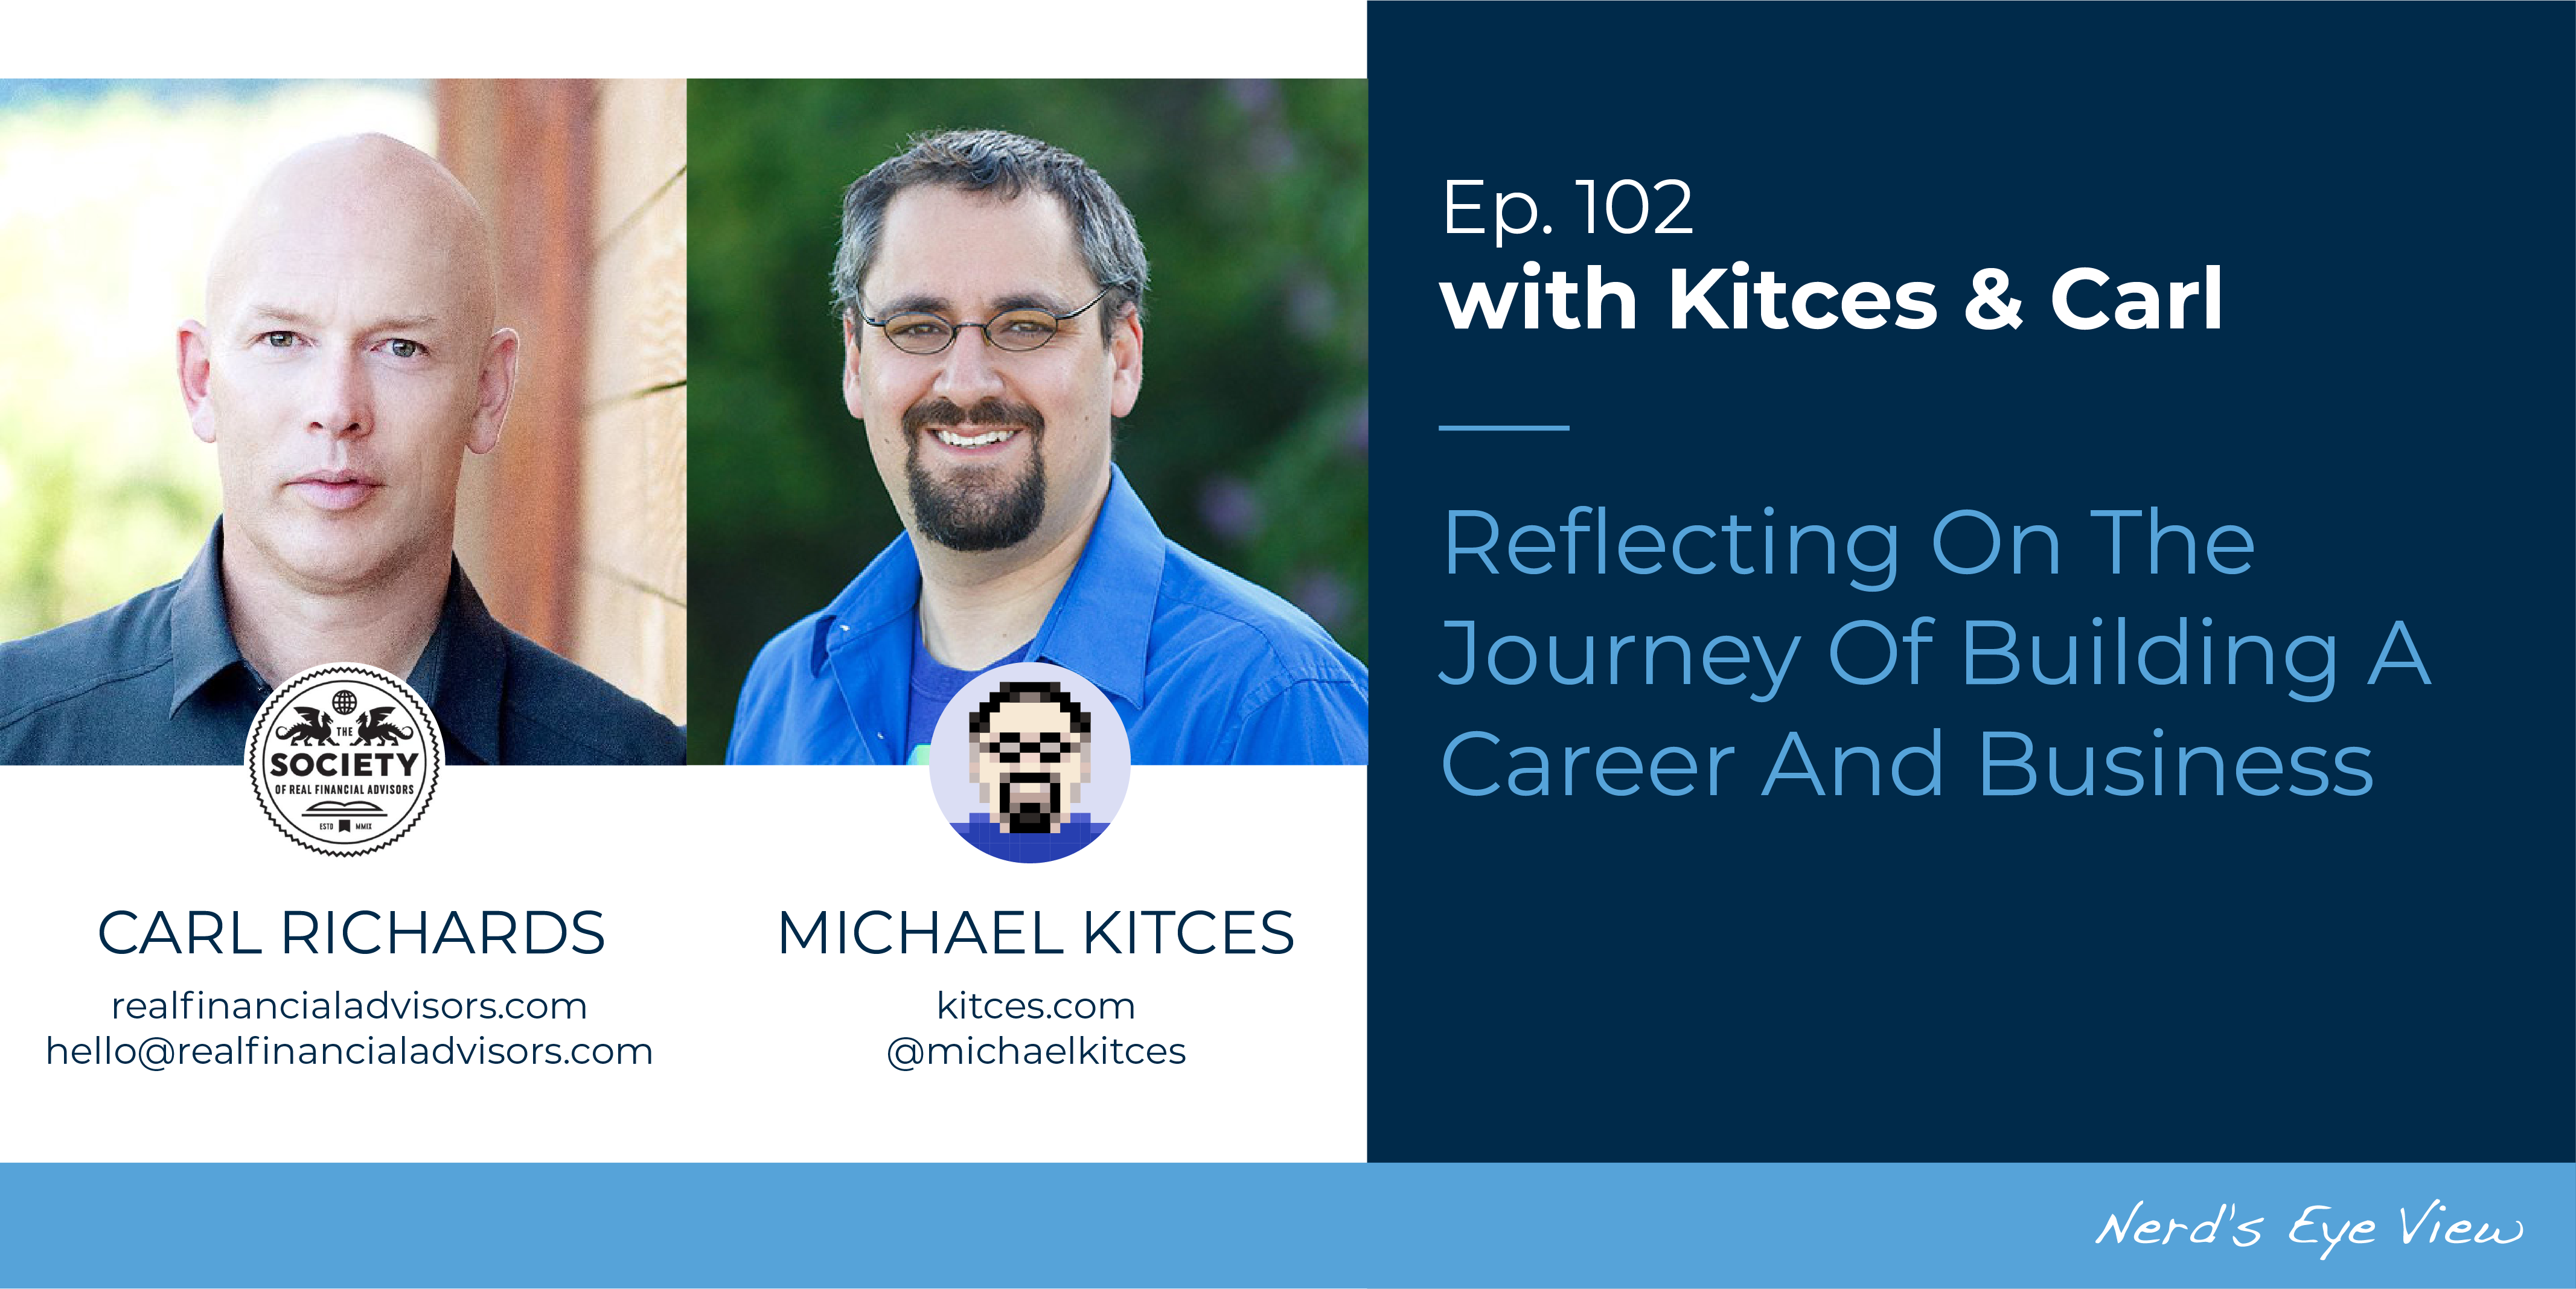 Kitces & Carl Ep 102: Reflecting On The Journey Of Building A Career And Business